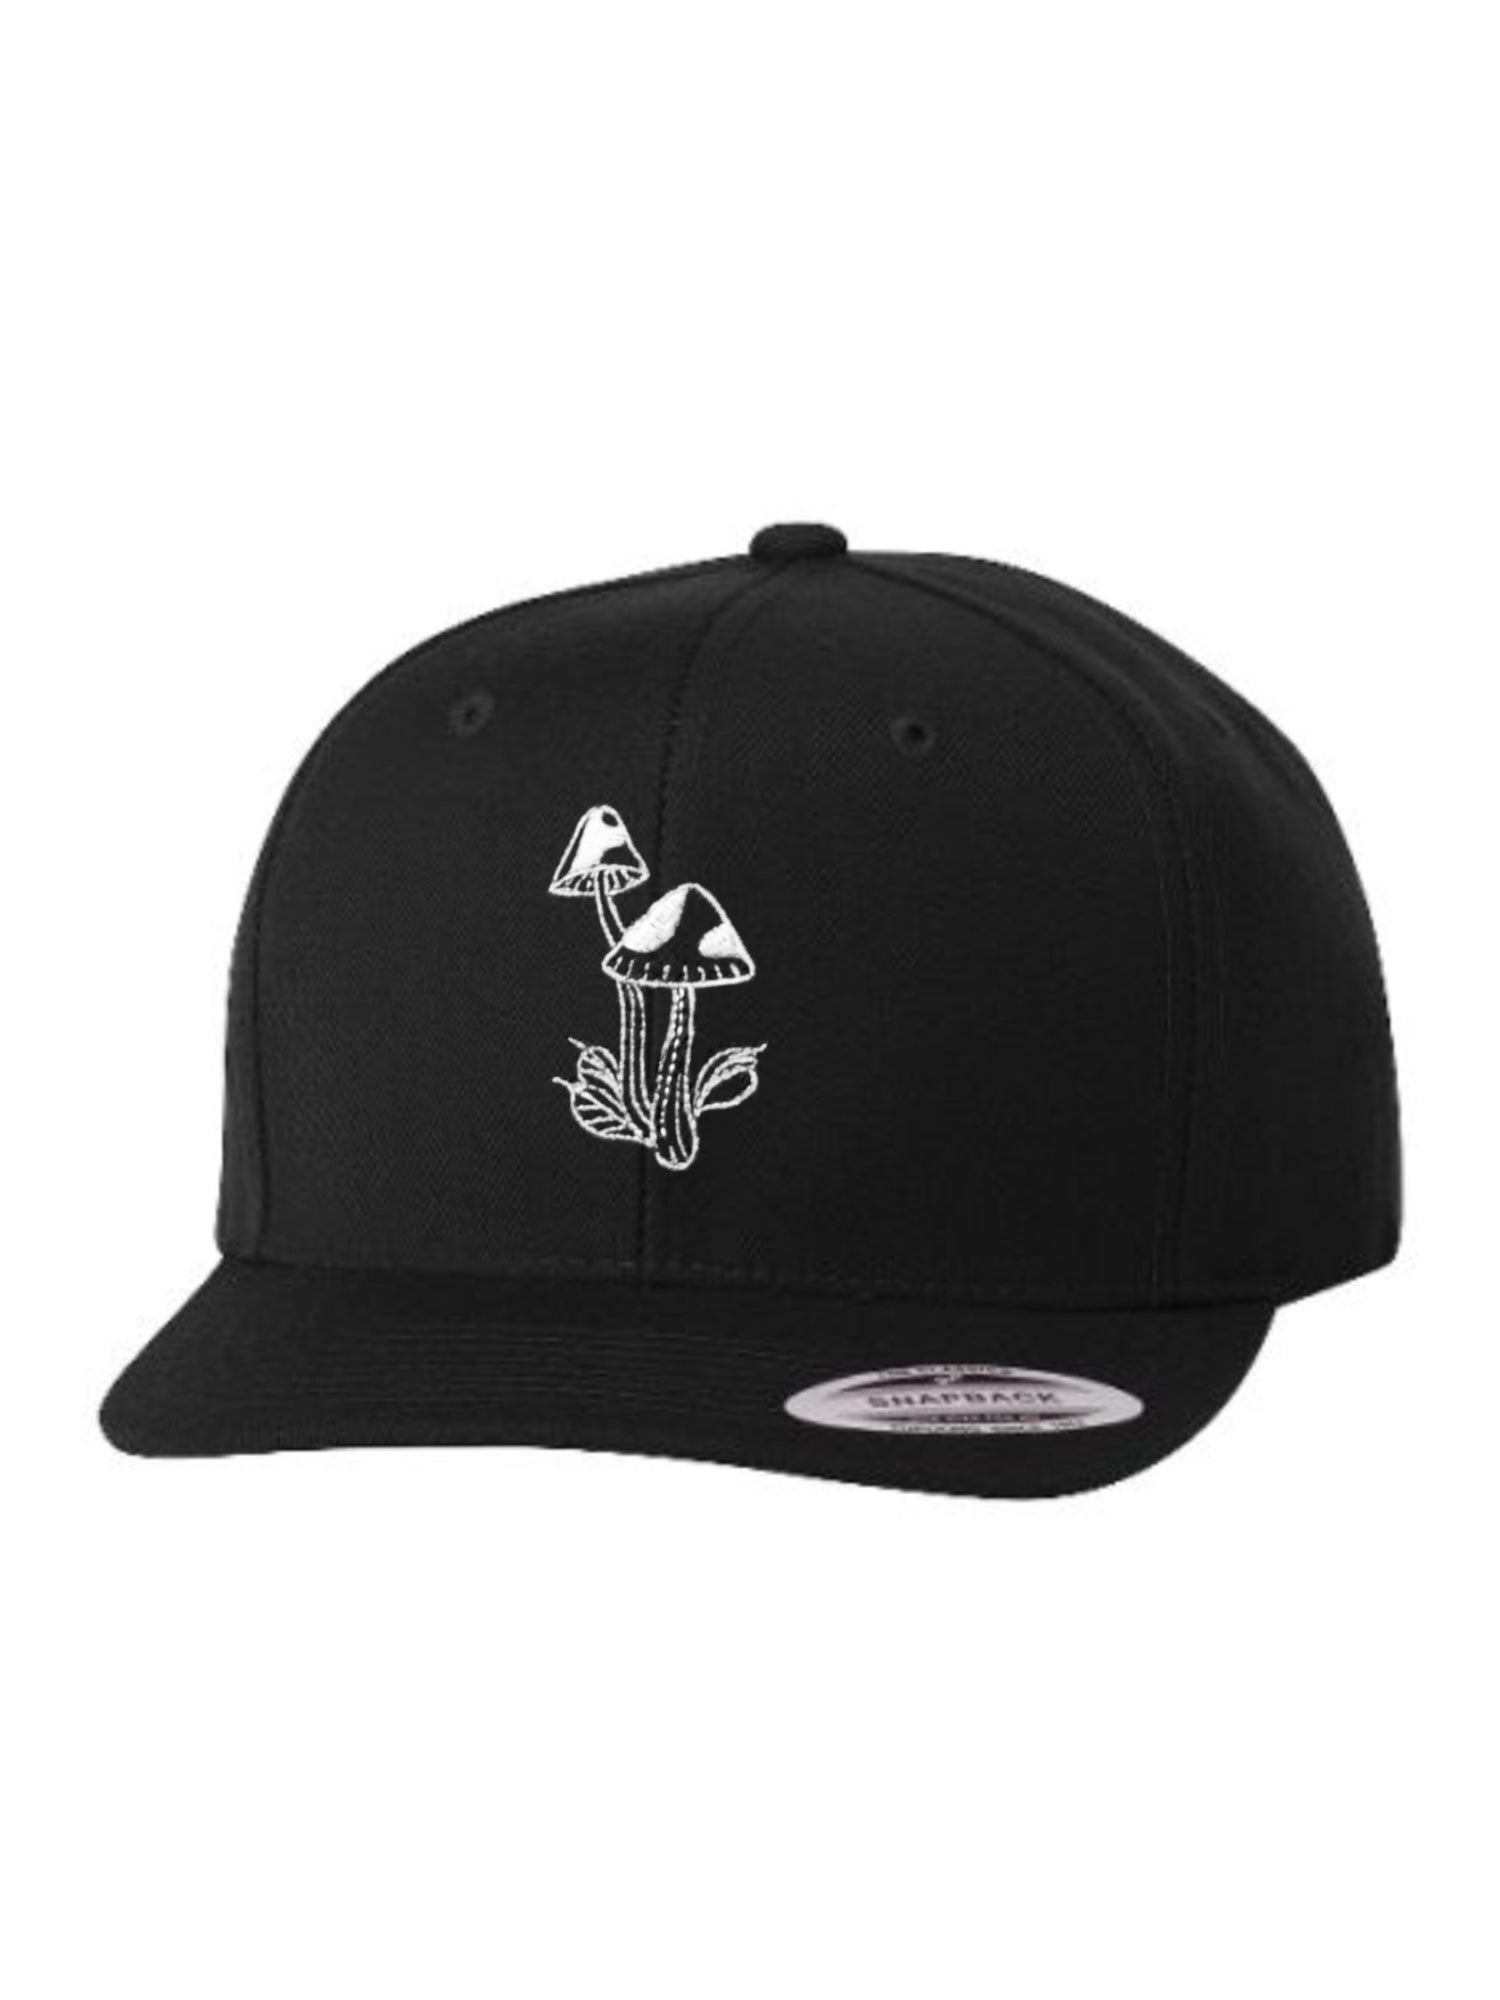 Black snapback hat with two tattoo-inspired psychedelic mushrooms and small leaves